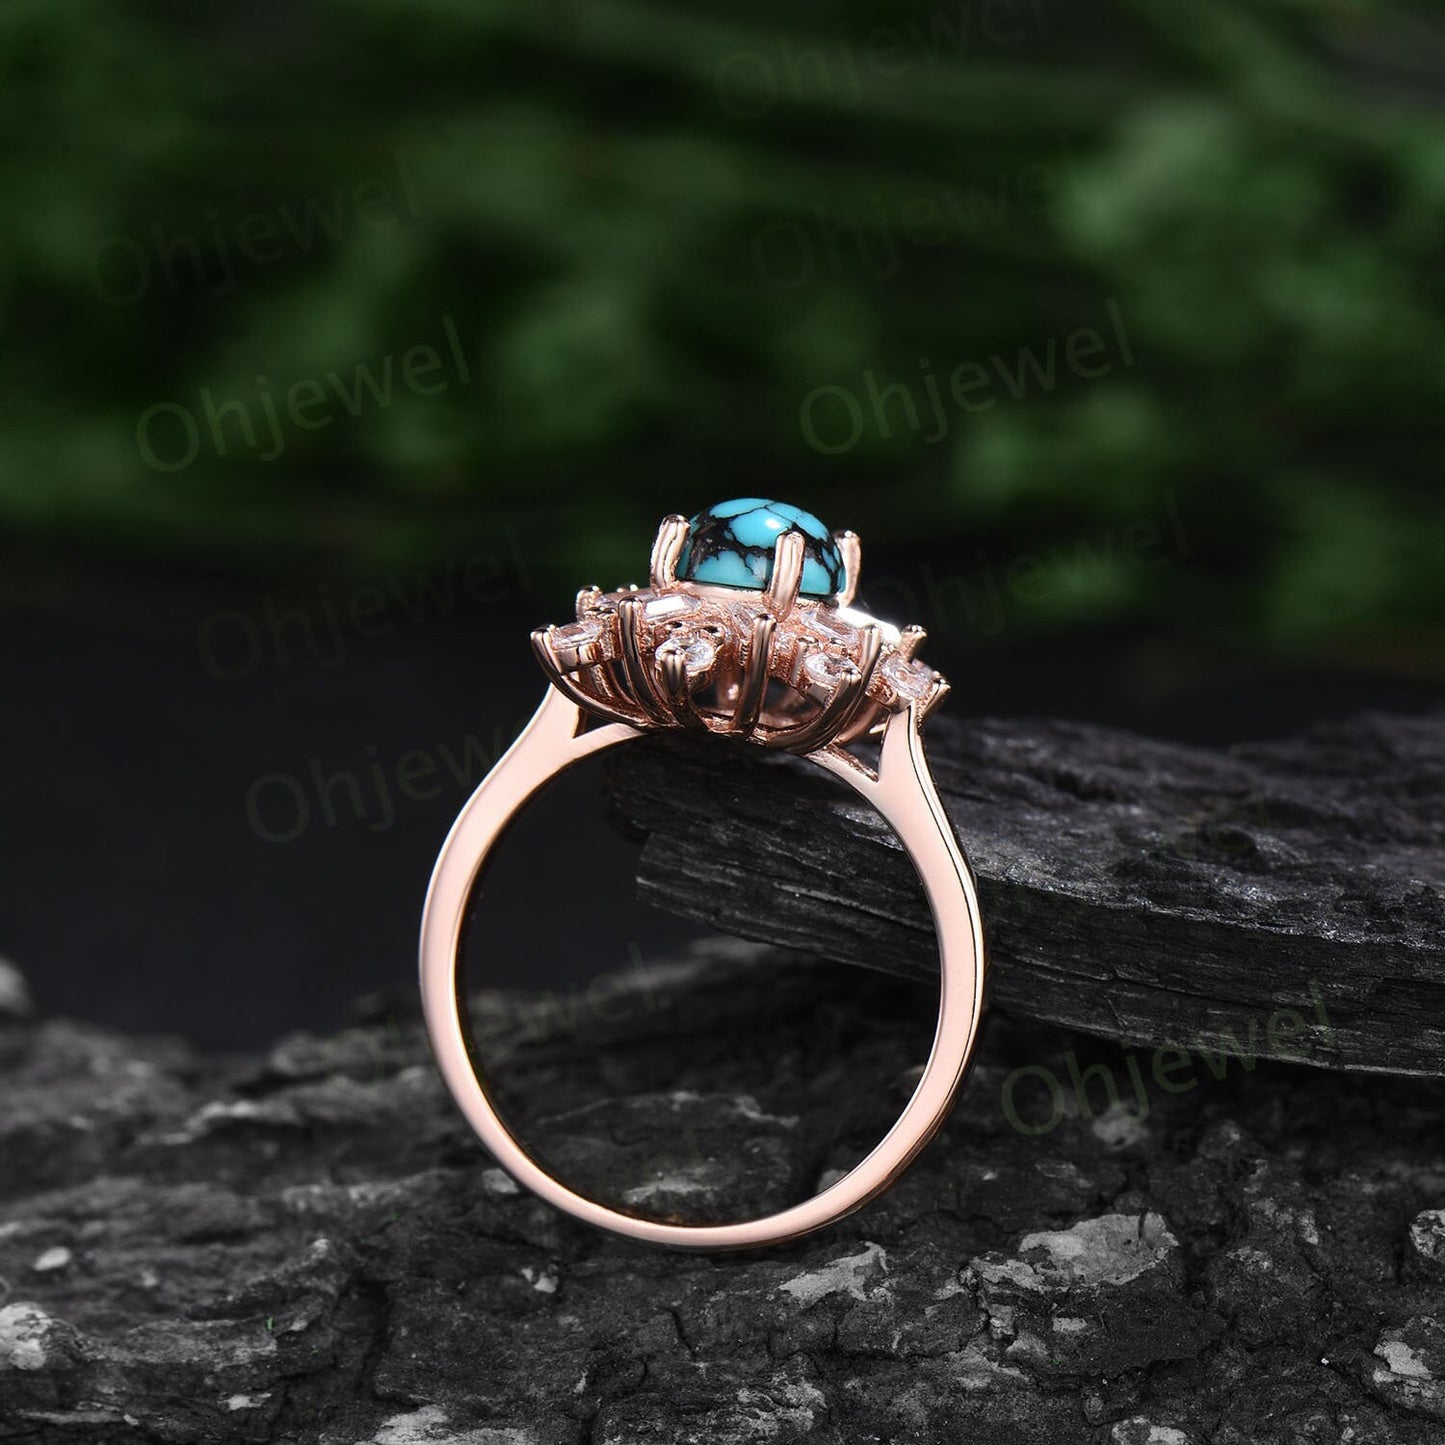 Oval cut natural Turquoise ring vintage rose gold halo unique engagement ring women cluster baguette cut moissanite wedding promise ring